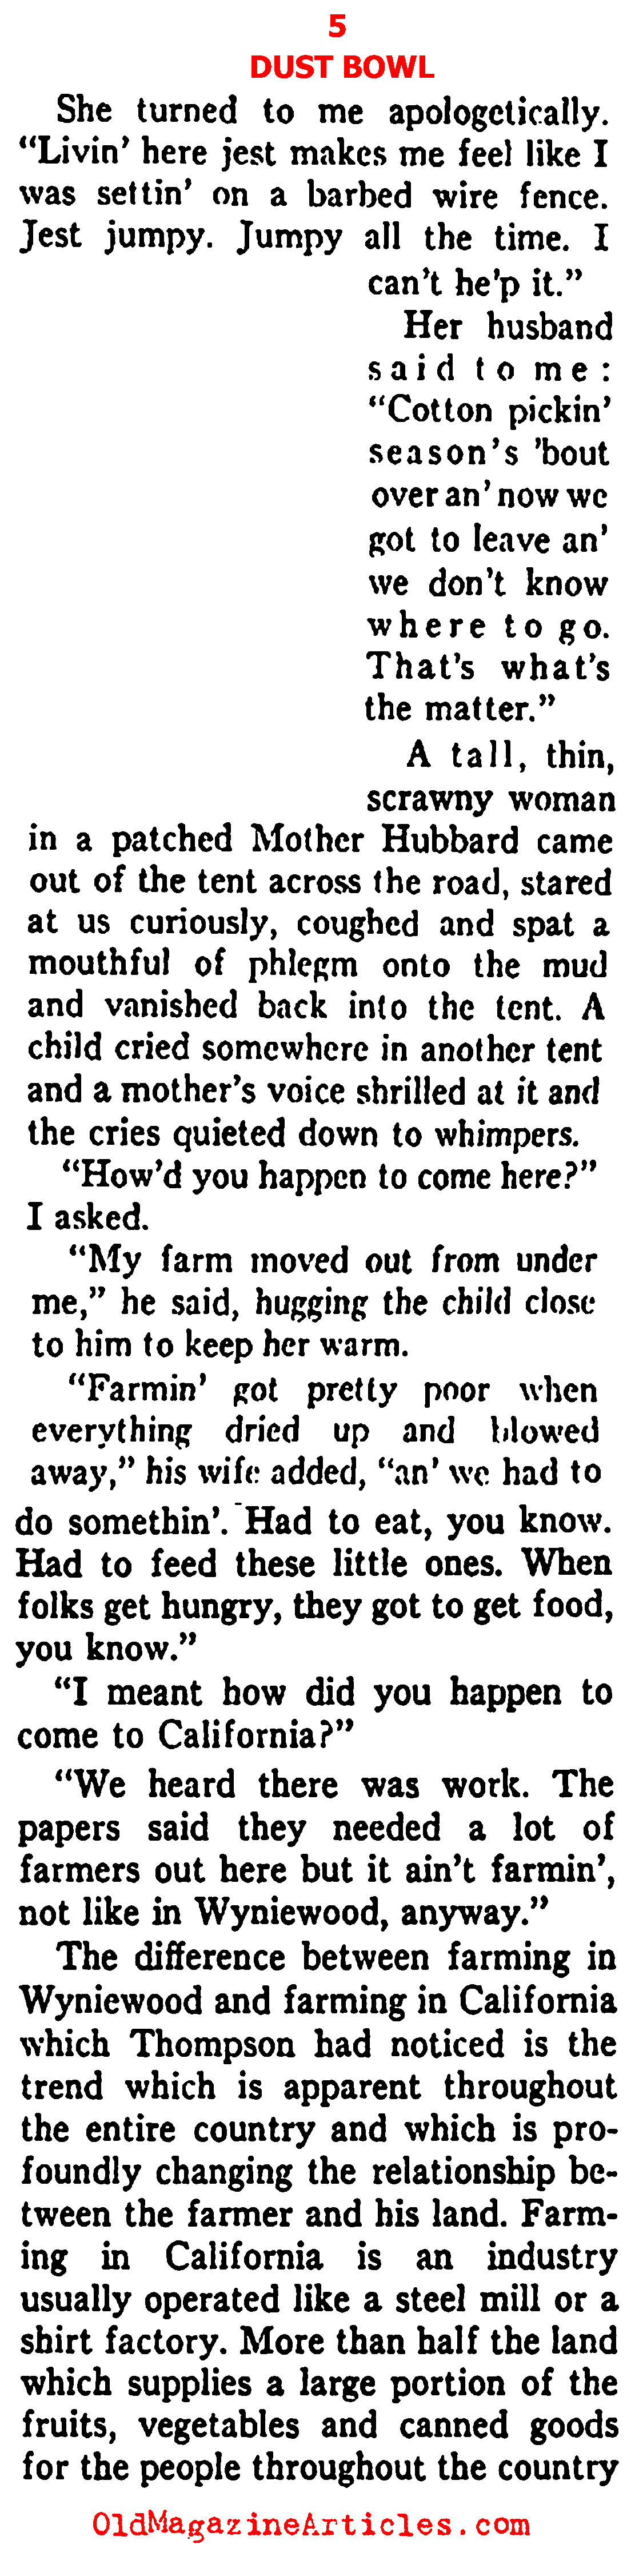 The Okies and the Dust Bowl (Ken Magazine, 1938)